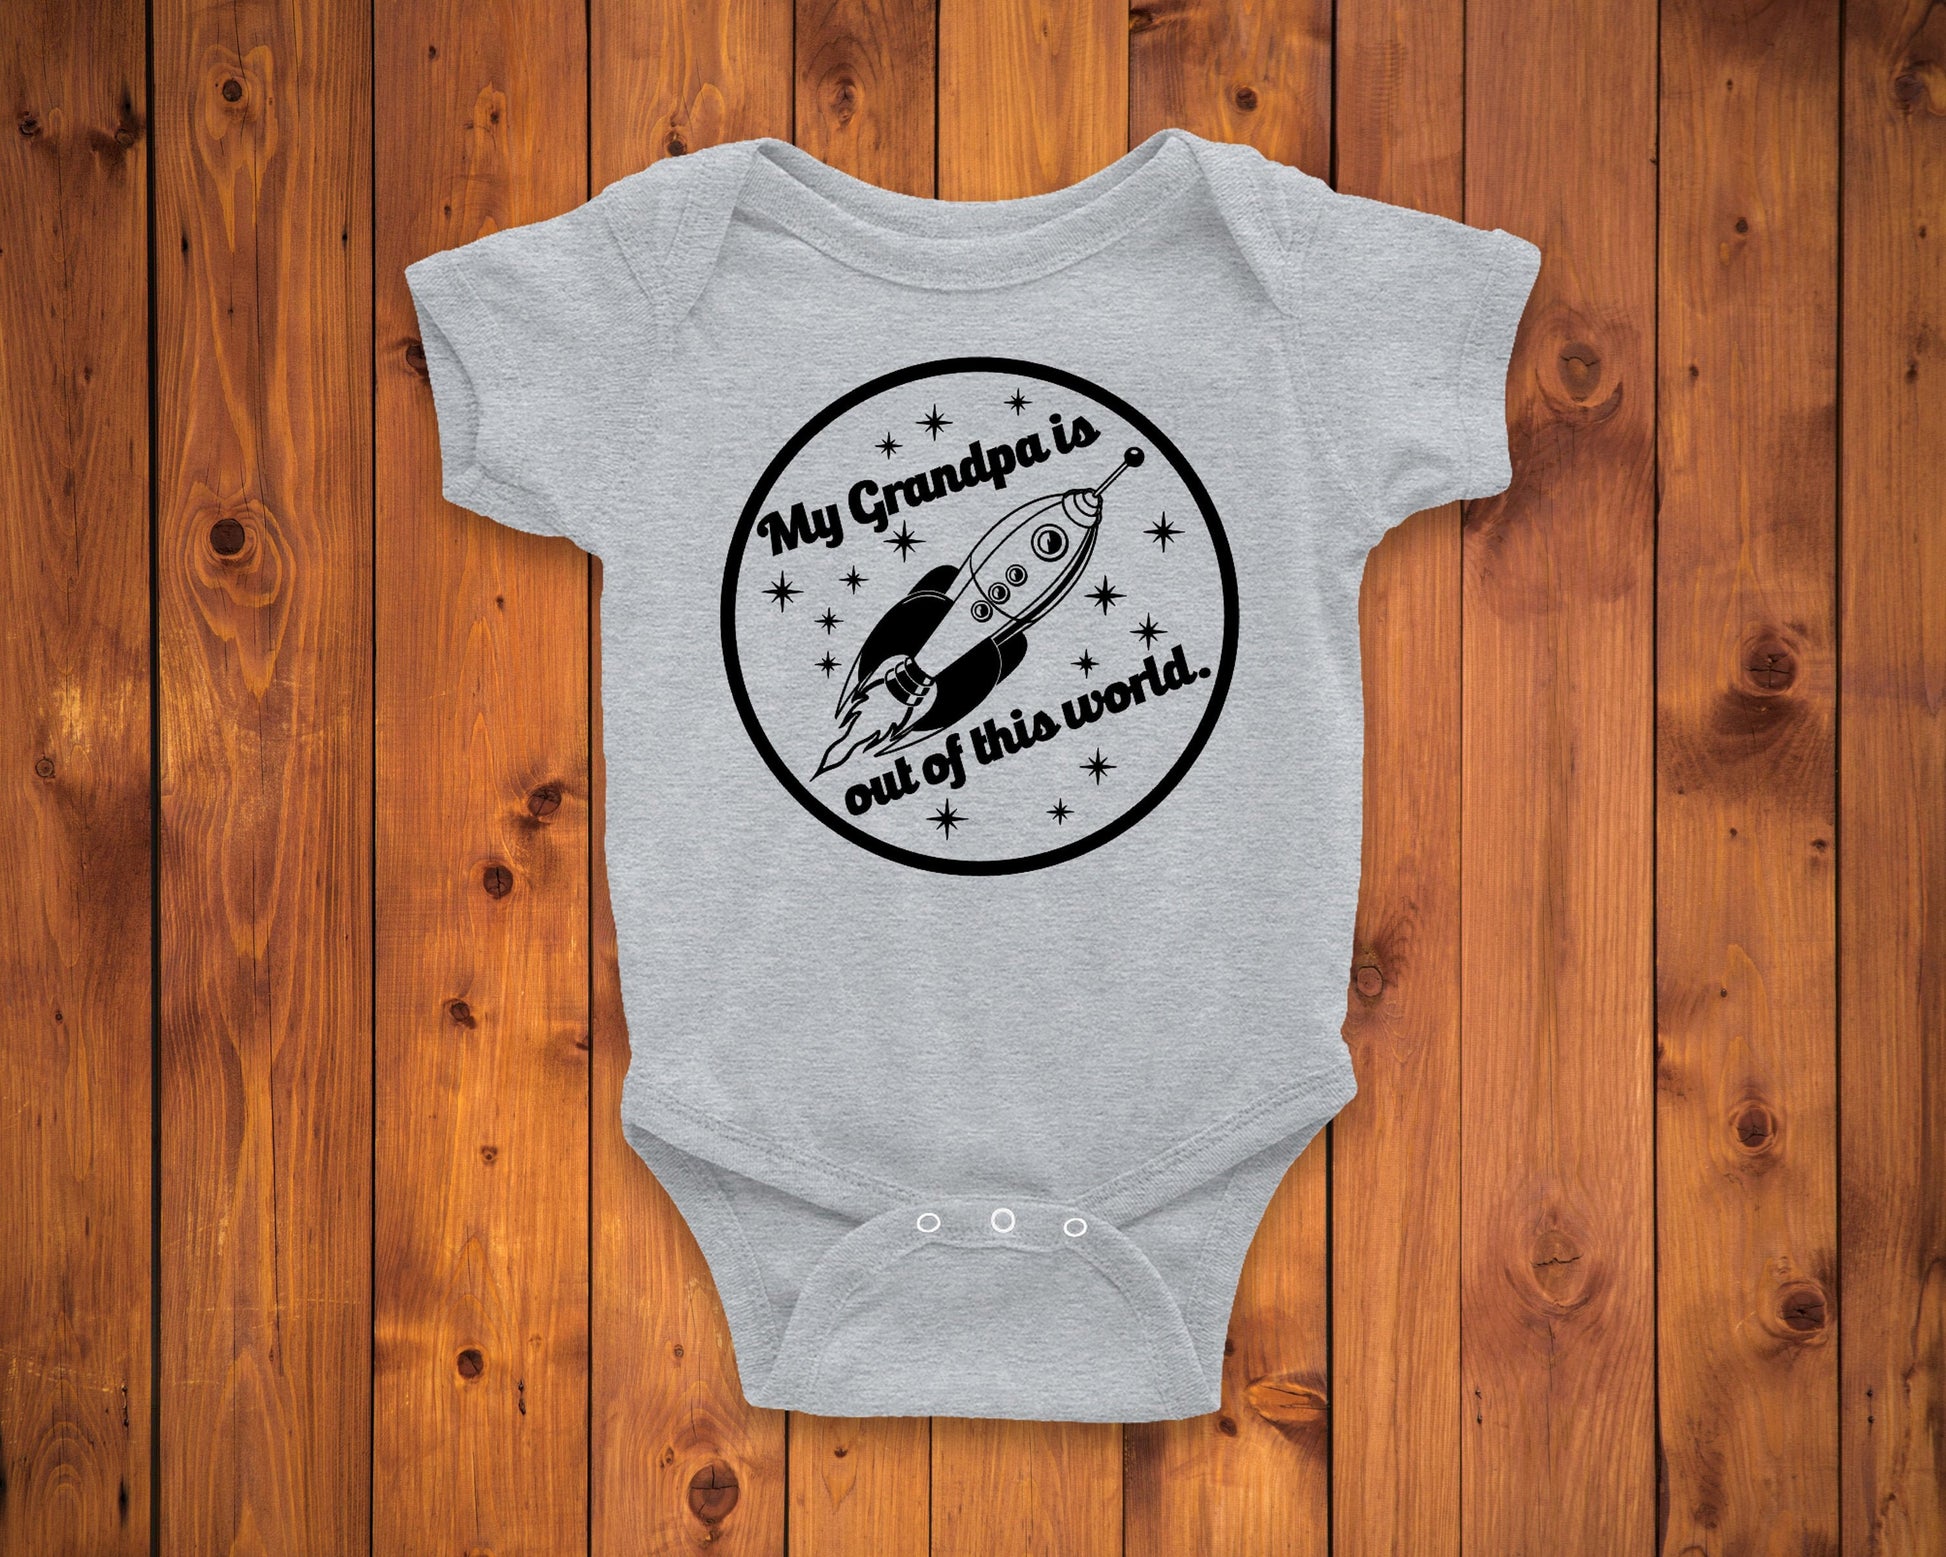 My Grandpa Is Out of This World Infant or Kids Shirt or Bodysuit - I Love My Grandpa Shirt - Fathers Day Shirt - Nerdy Grandpa